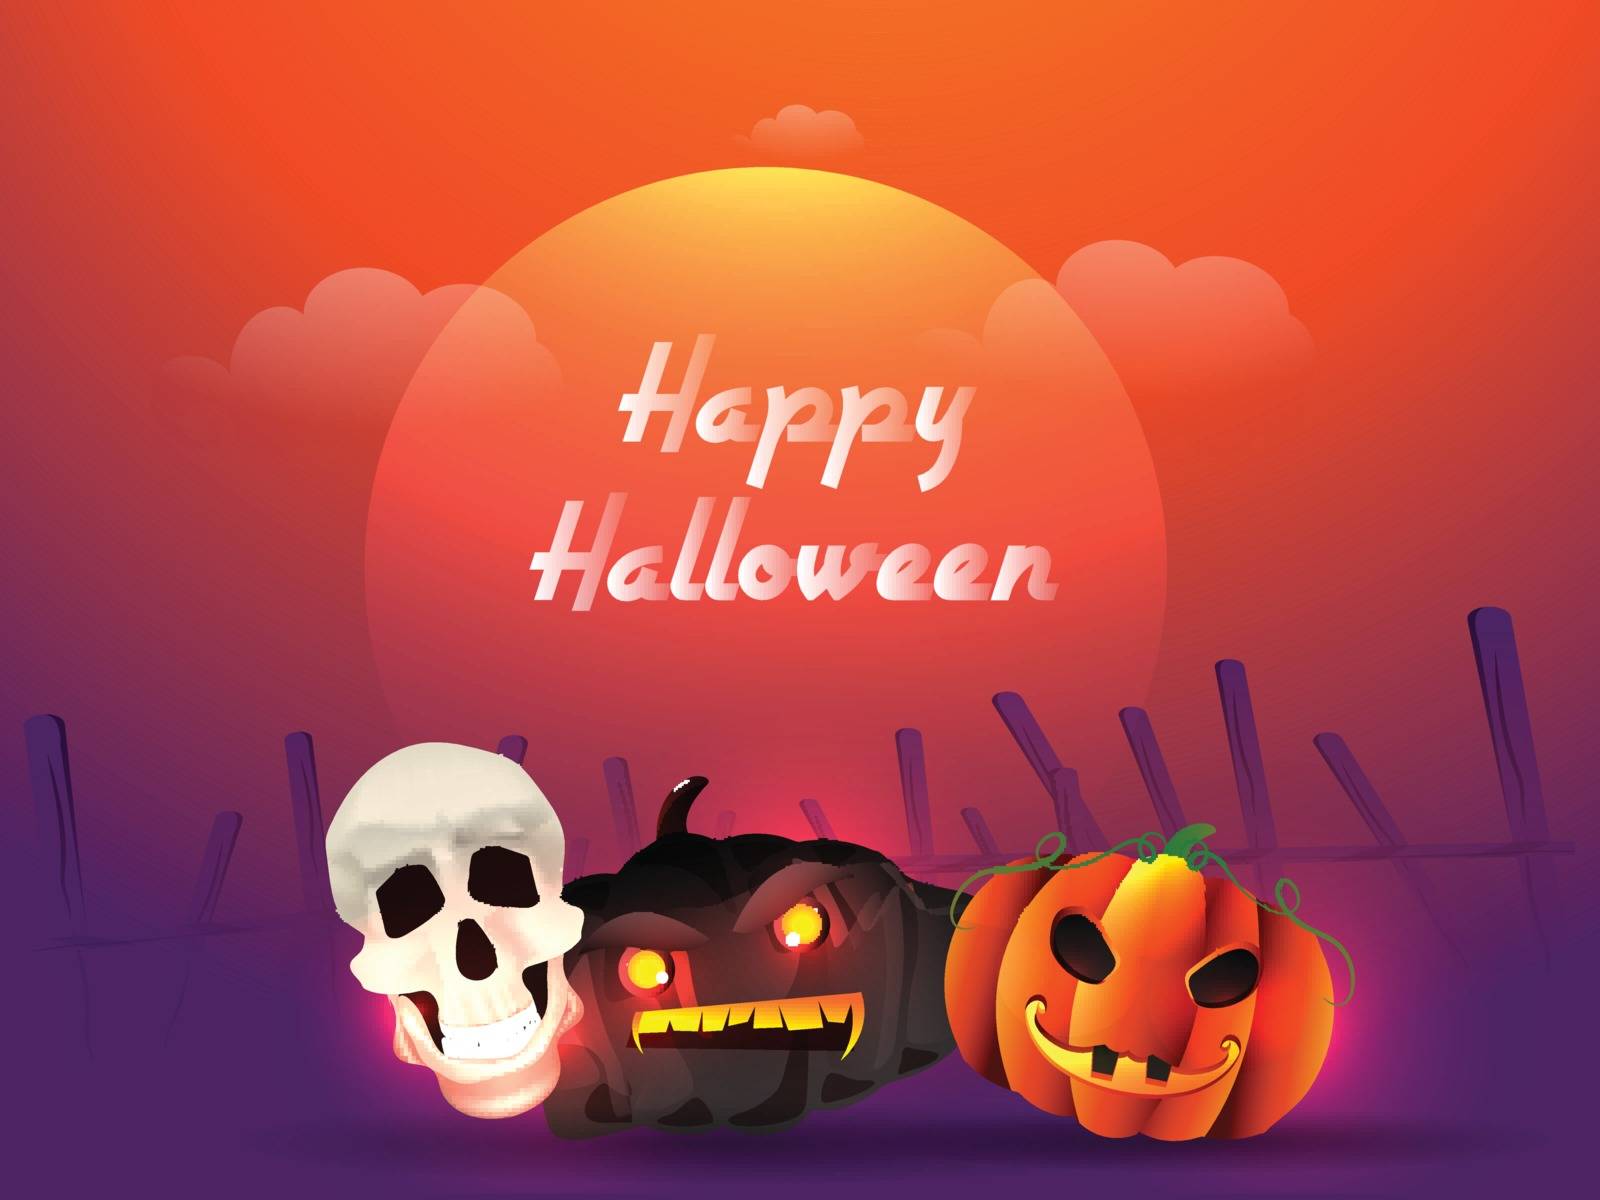 Scary faces of pumpkins and human skull on glossy full moon background. Happy Halloween greeting card design.